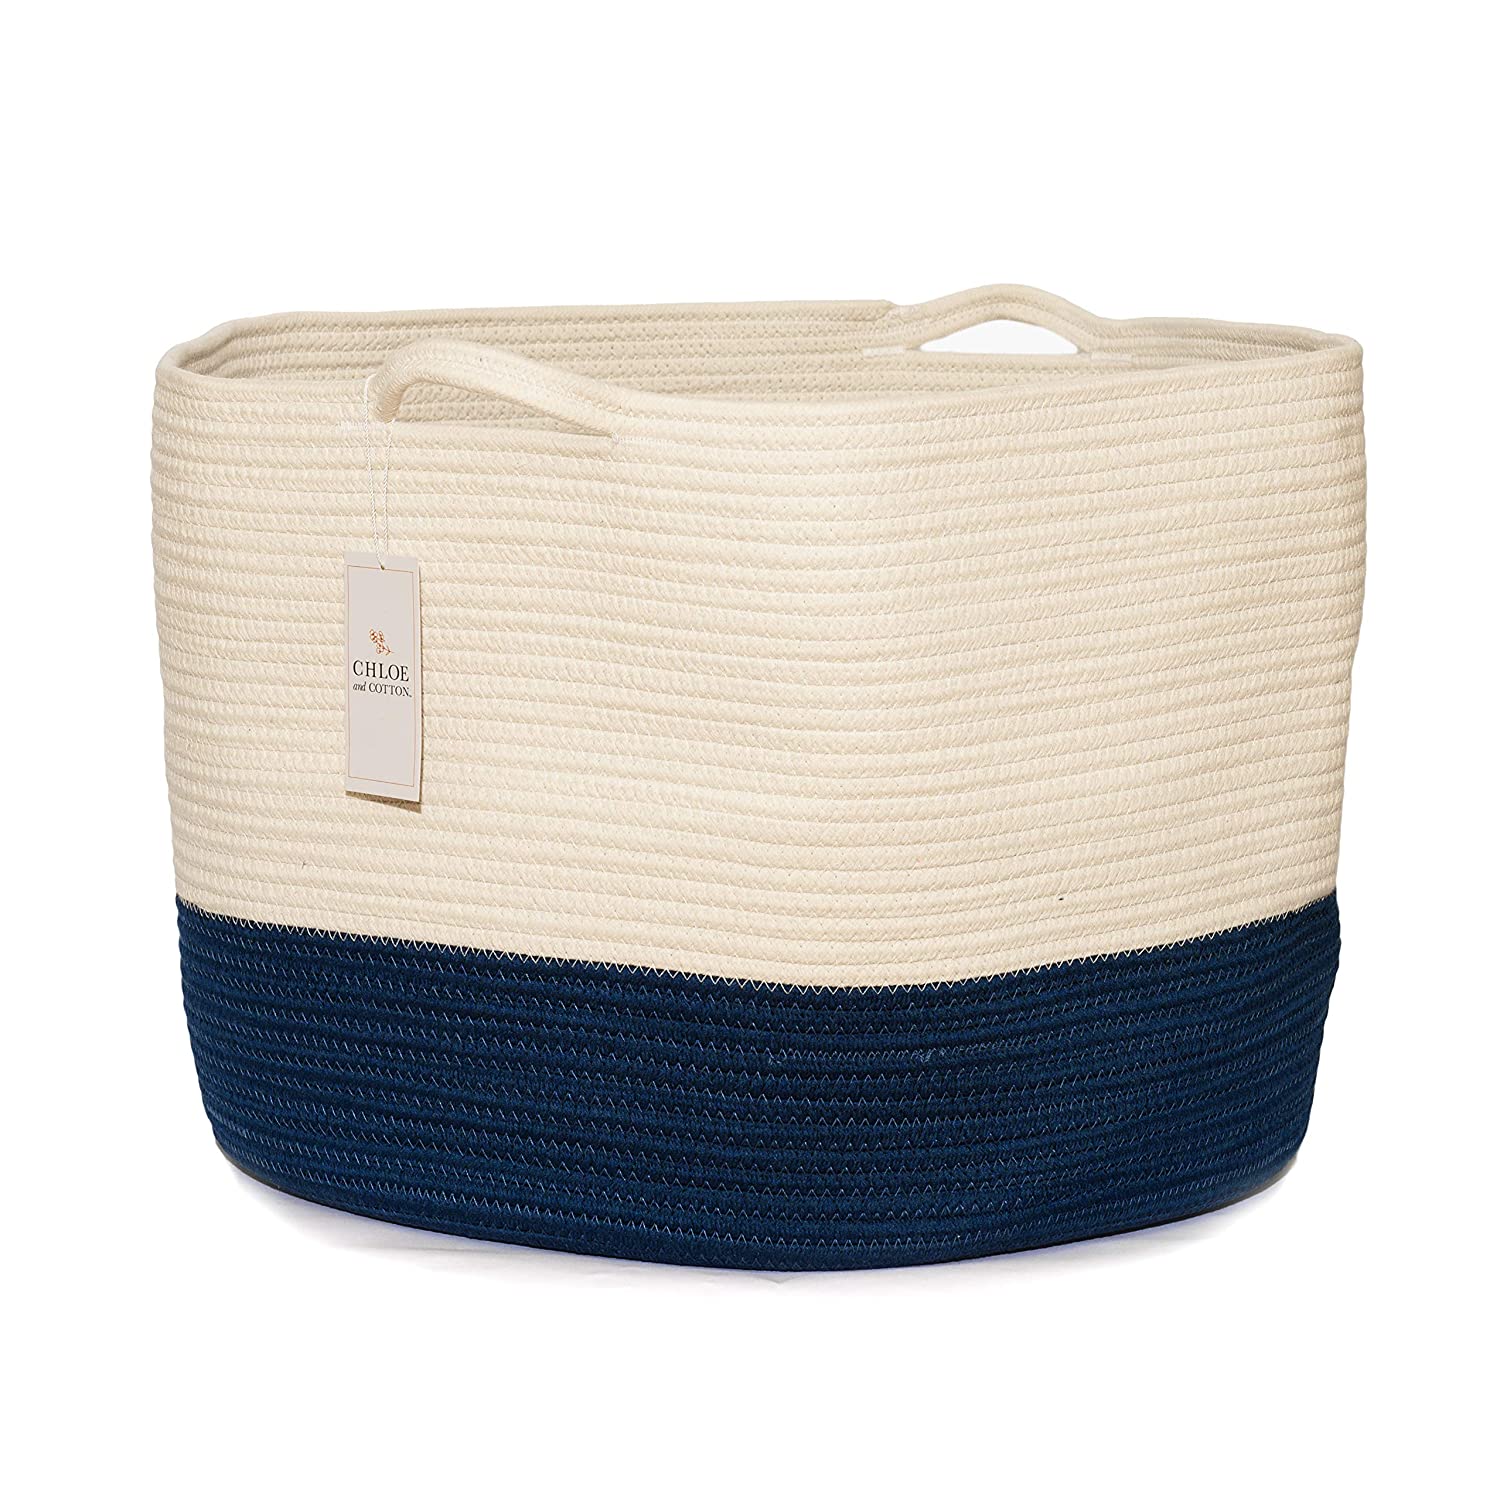 Chloe and Cotton XXXL Extra Large Woven Rope Basket with Handles for Storage - 15" H x 21.5" D - Navy White - image 1 of 5